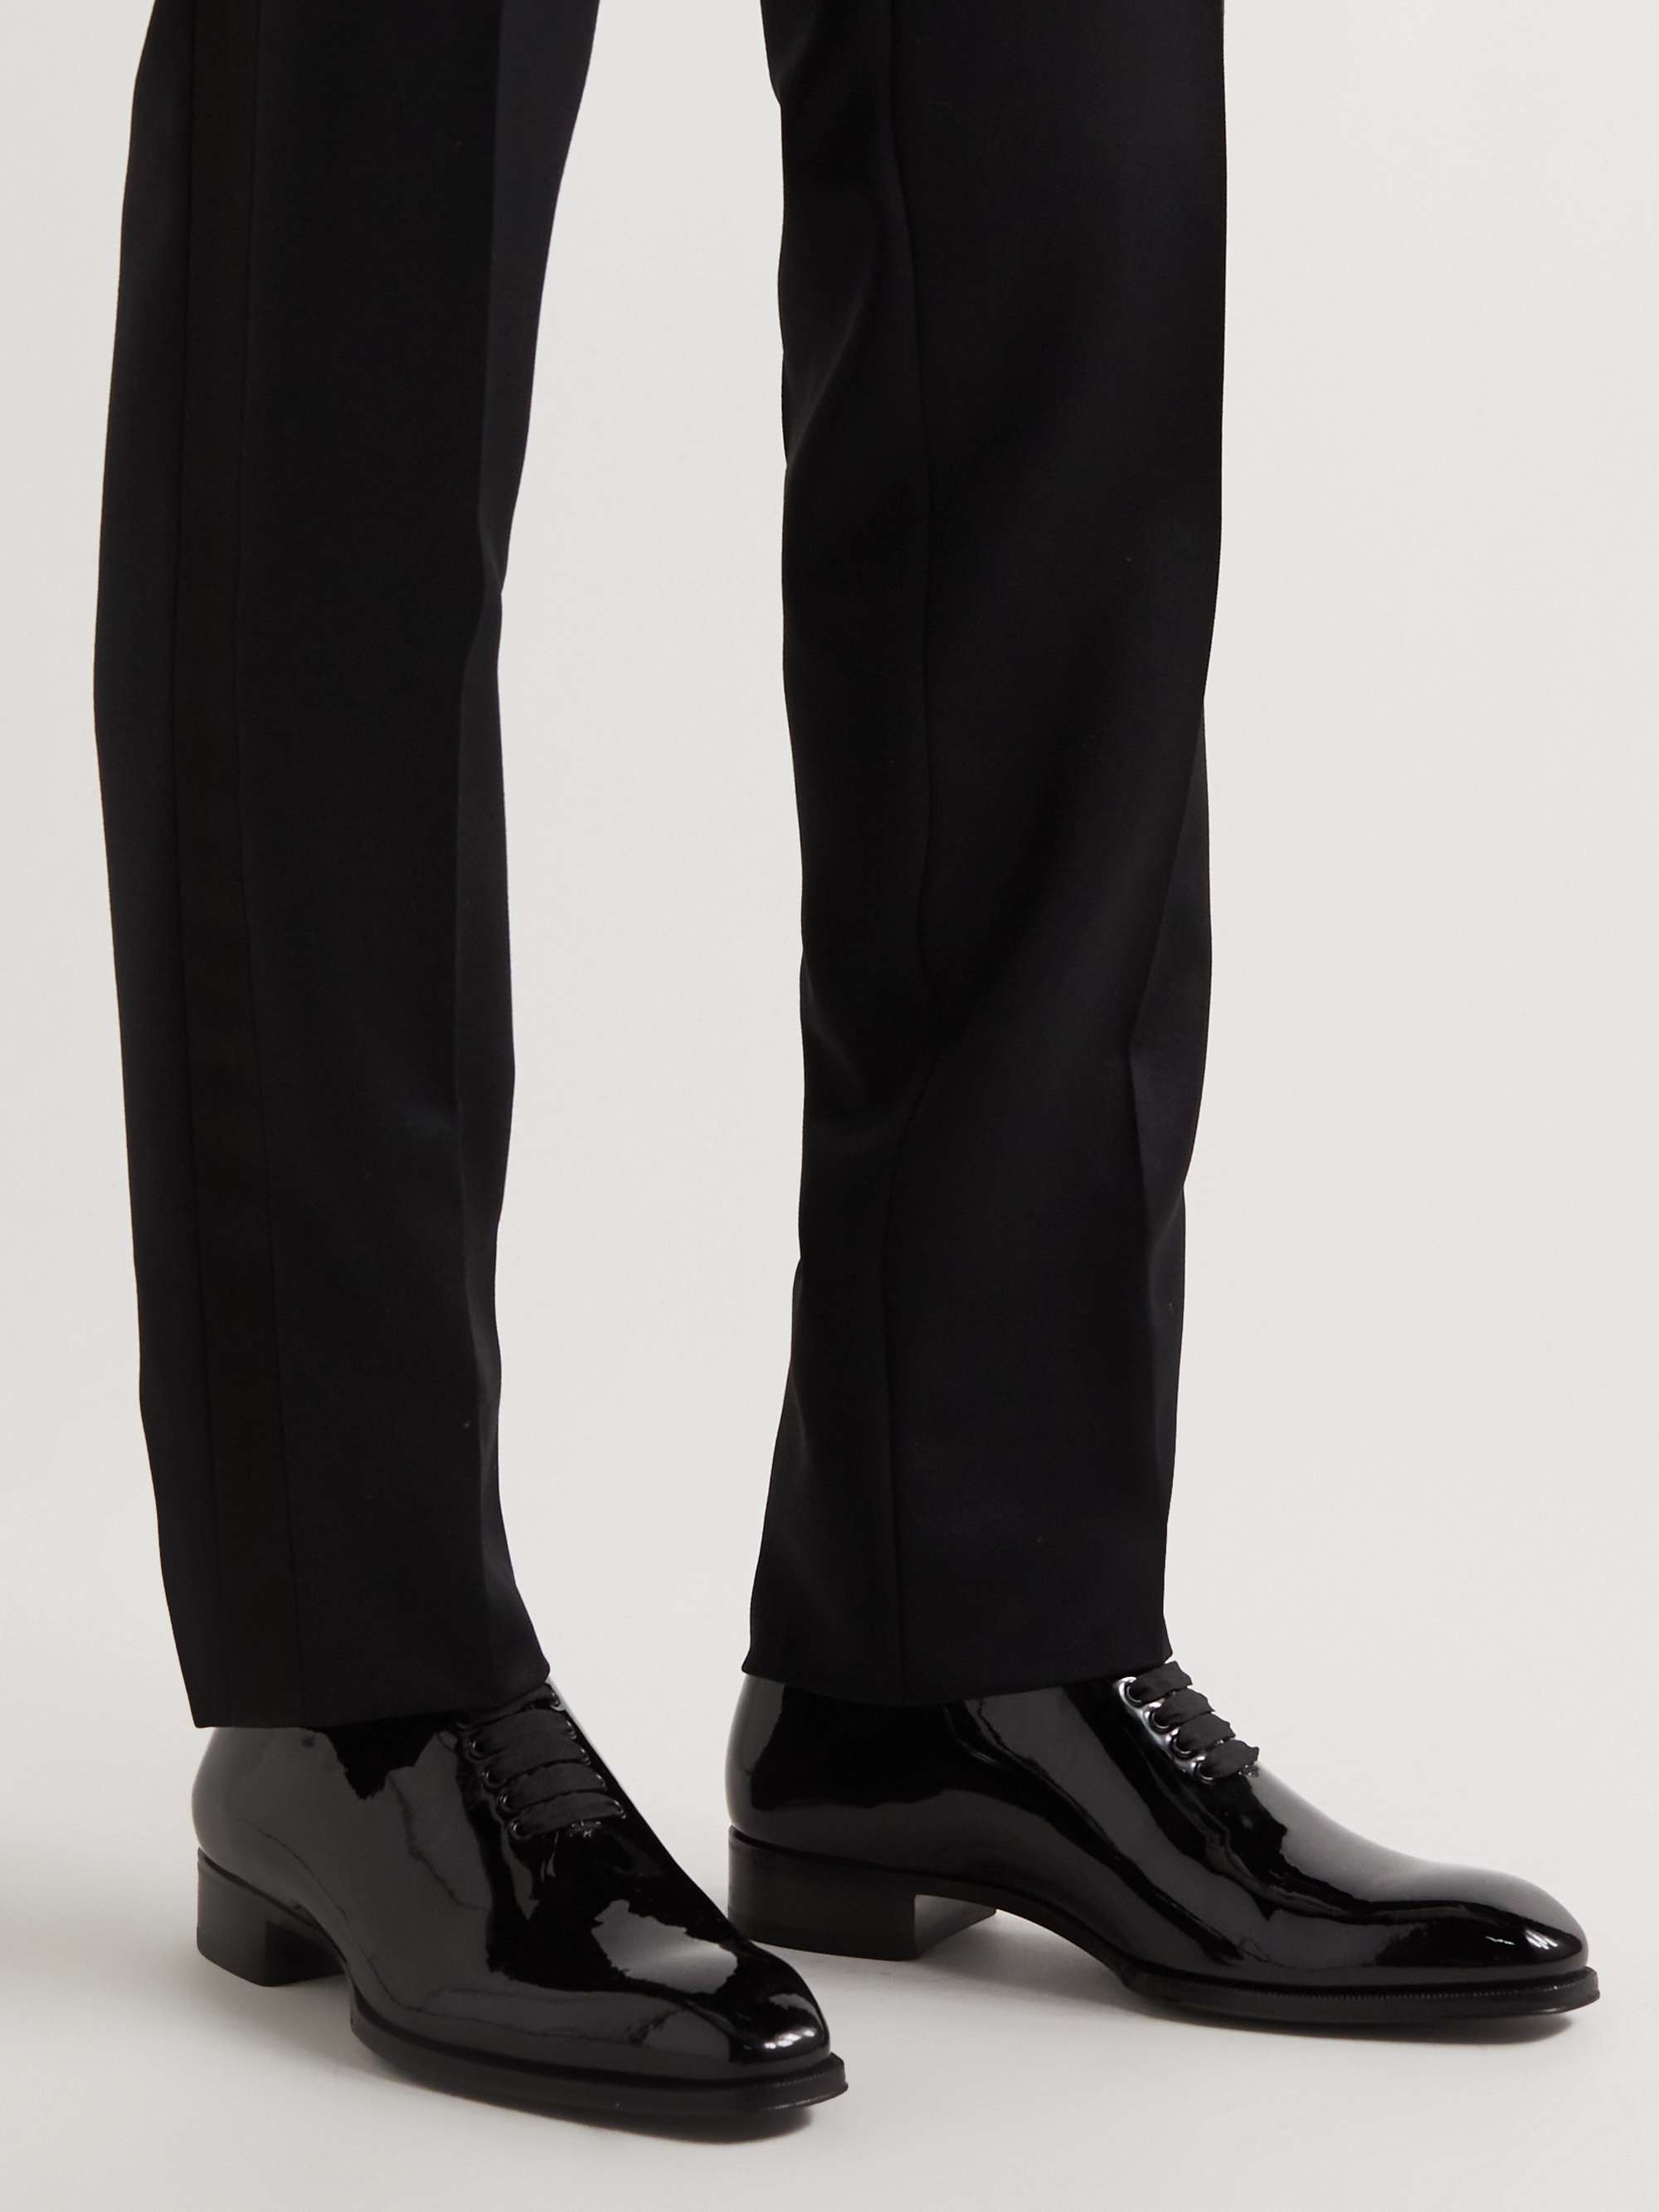 TOM FORD Elkan Whole-Cut Patent-Leather Oxford Shoes for Men | MR PORTER